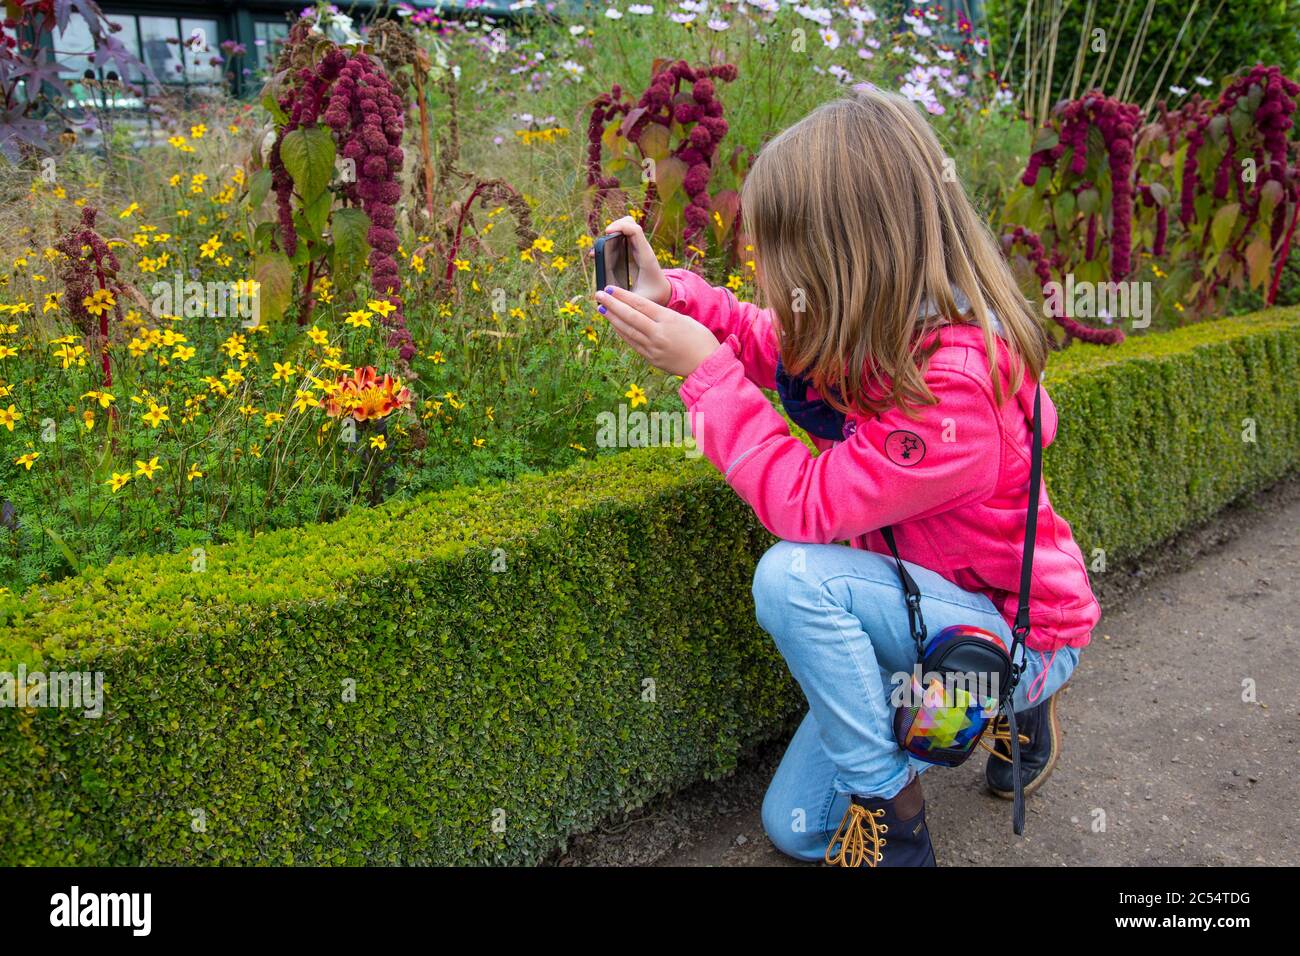 Young child taking a photograph Stock Photo